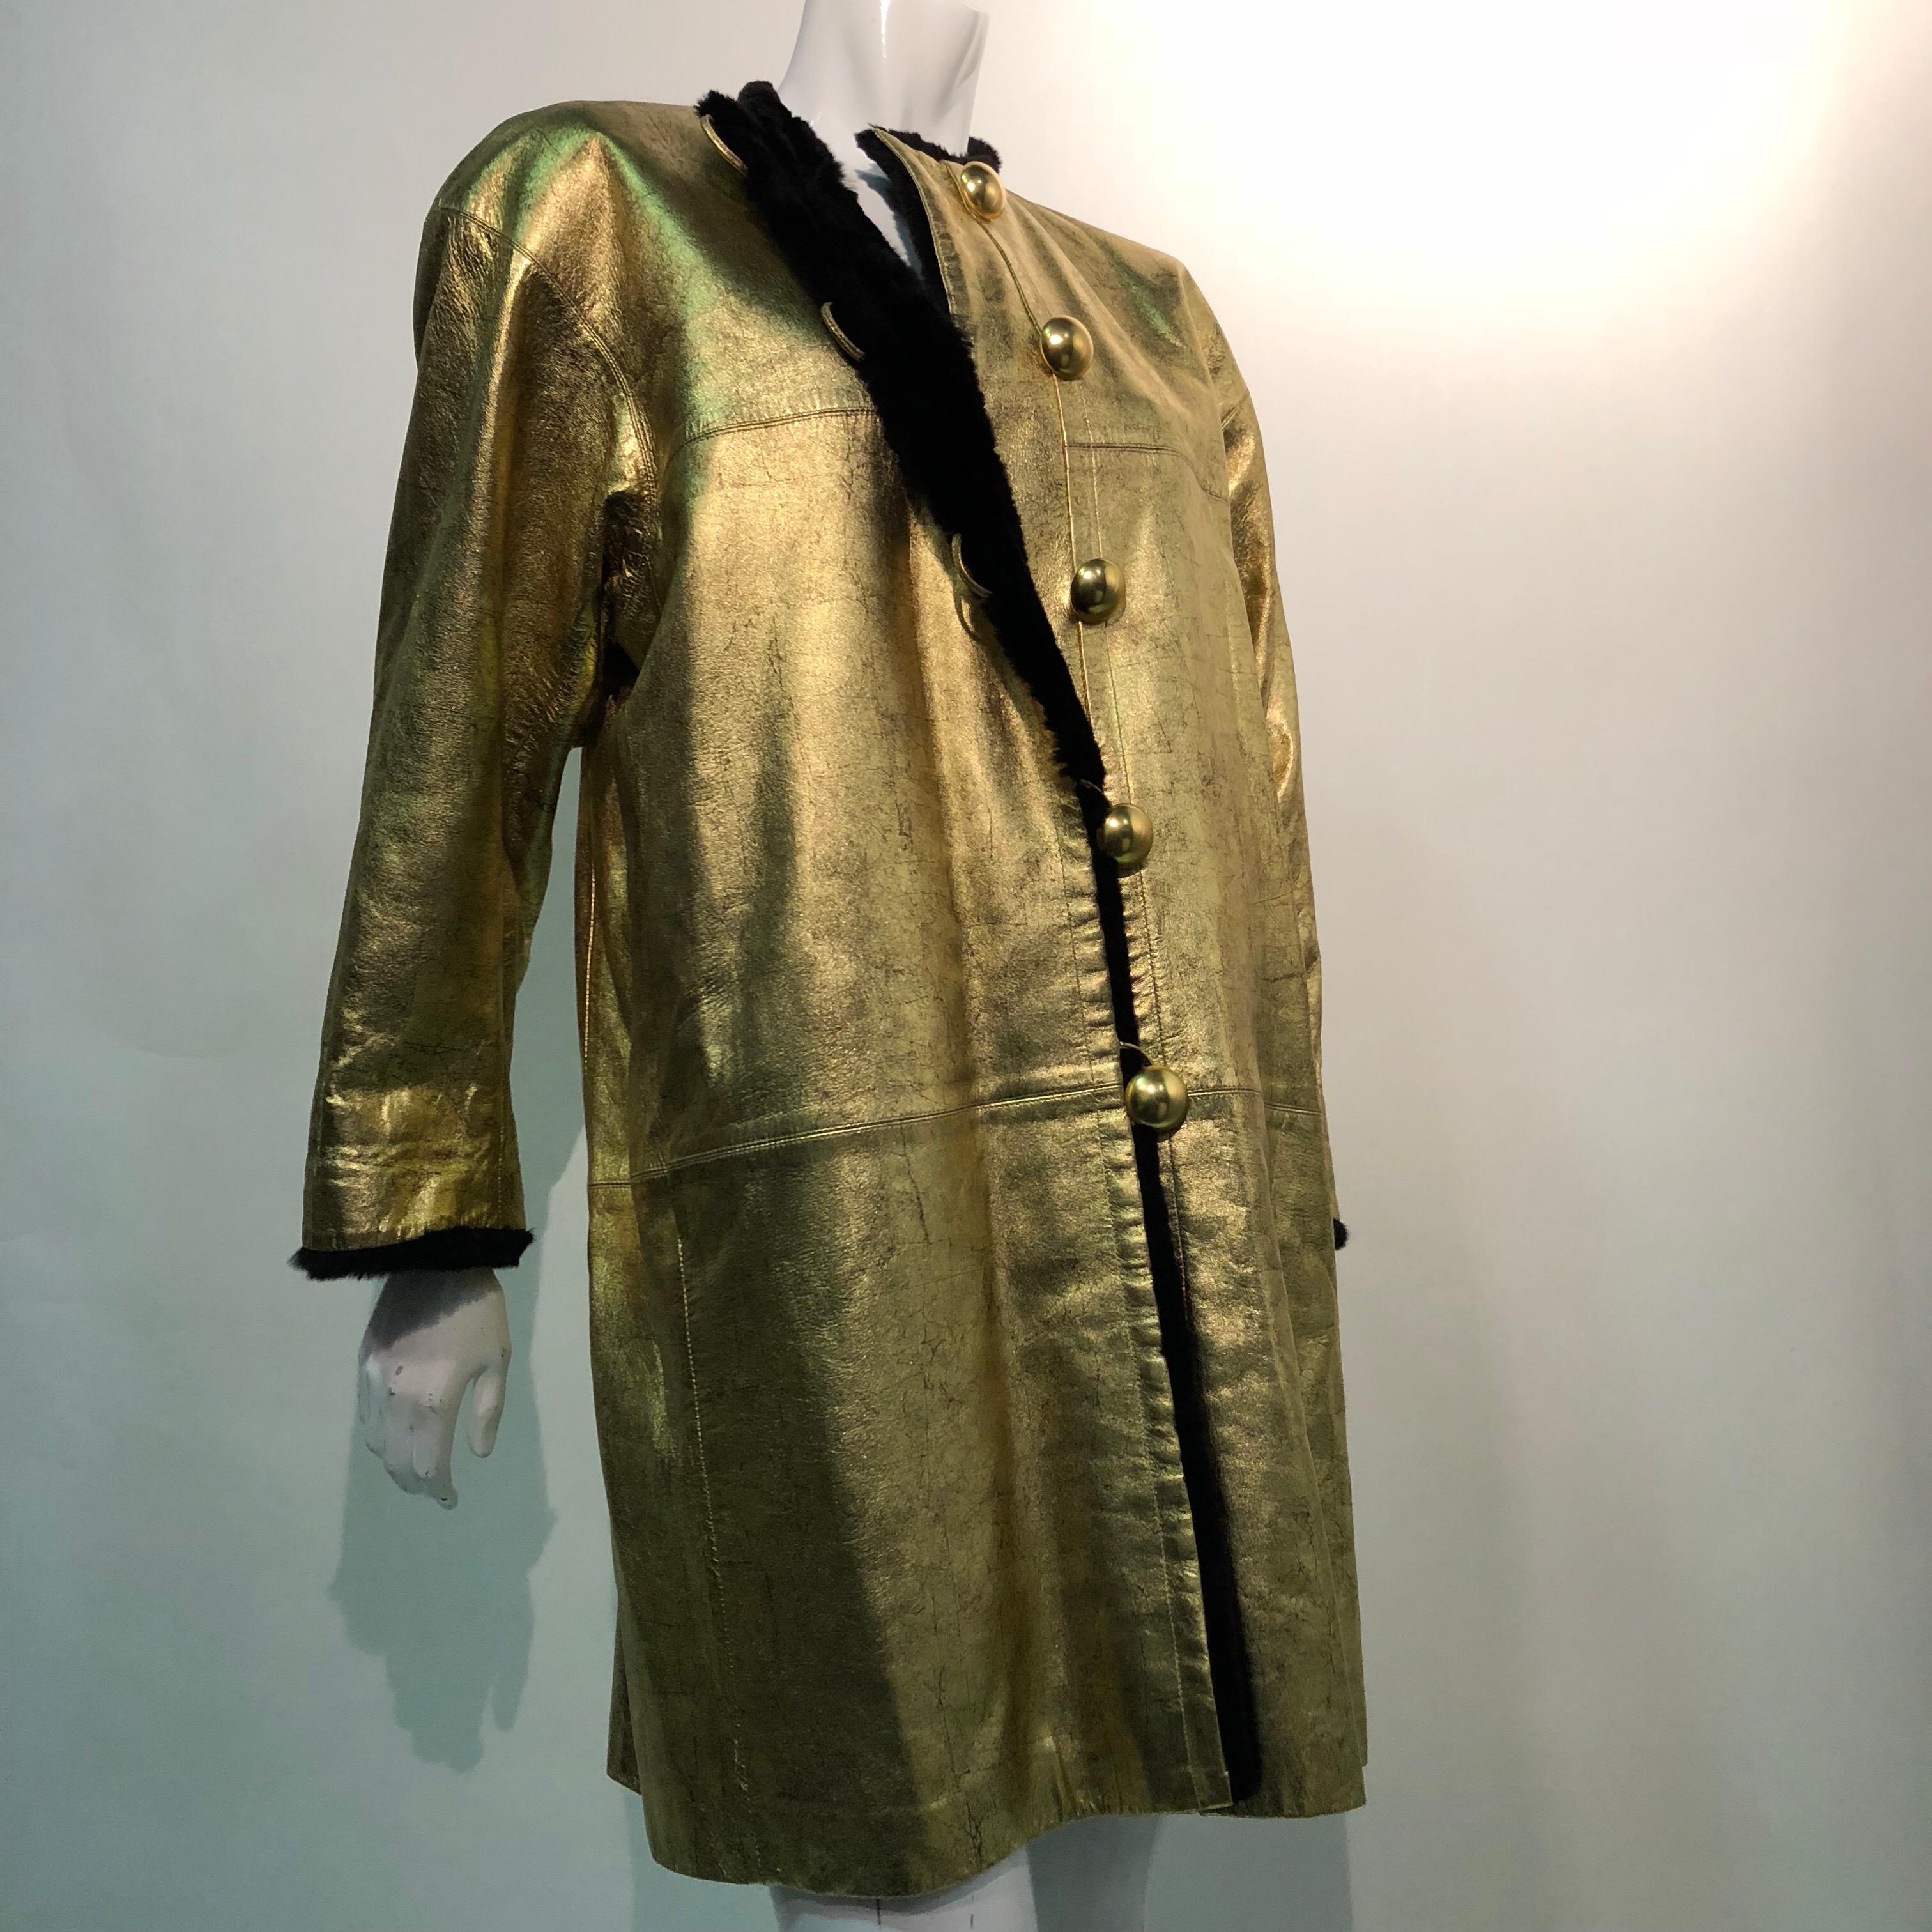 1980s Yves Saint Laurent Gold Leather Coat W/ Black Sheared Fur Interior  In Excellent Condition For Sale In Gresham, OR